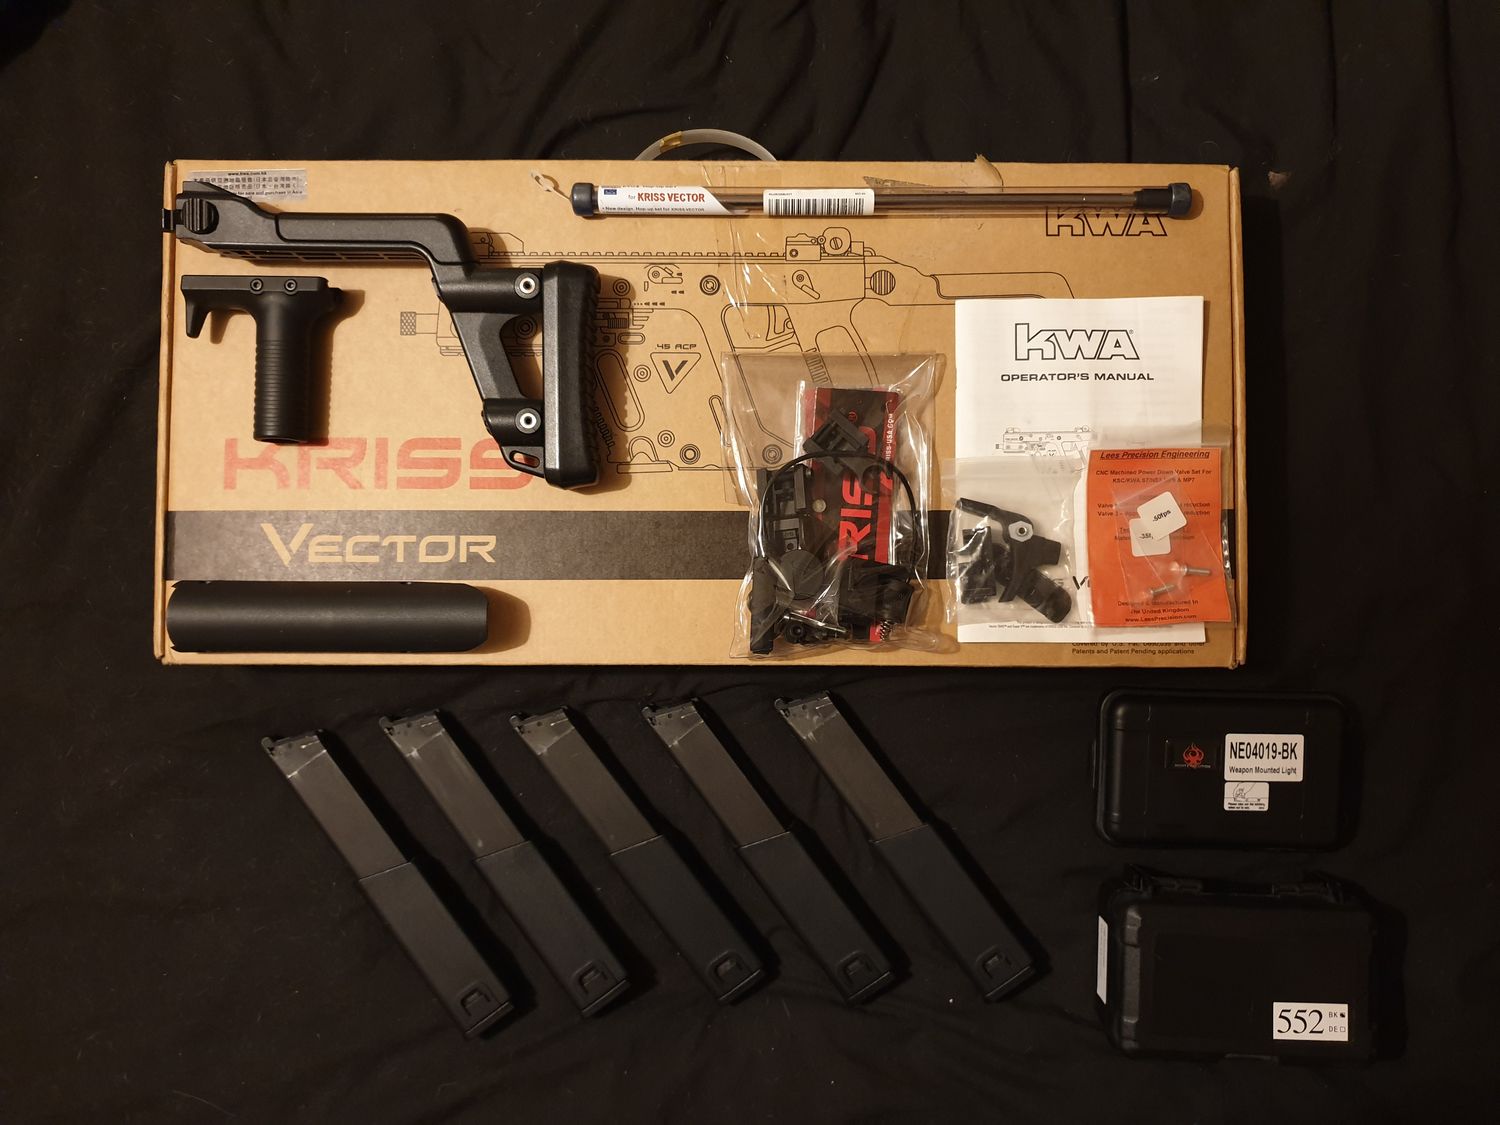 KWA Kriss Vector GBB package, 6 mags, sights and lots more. - Gas